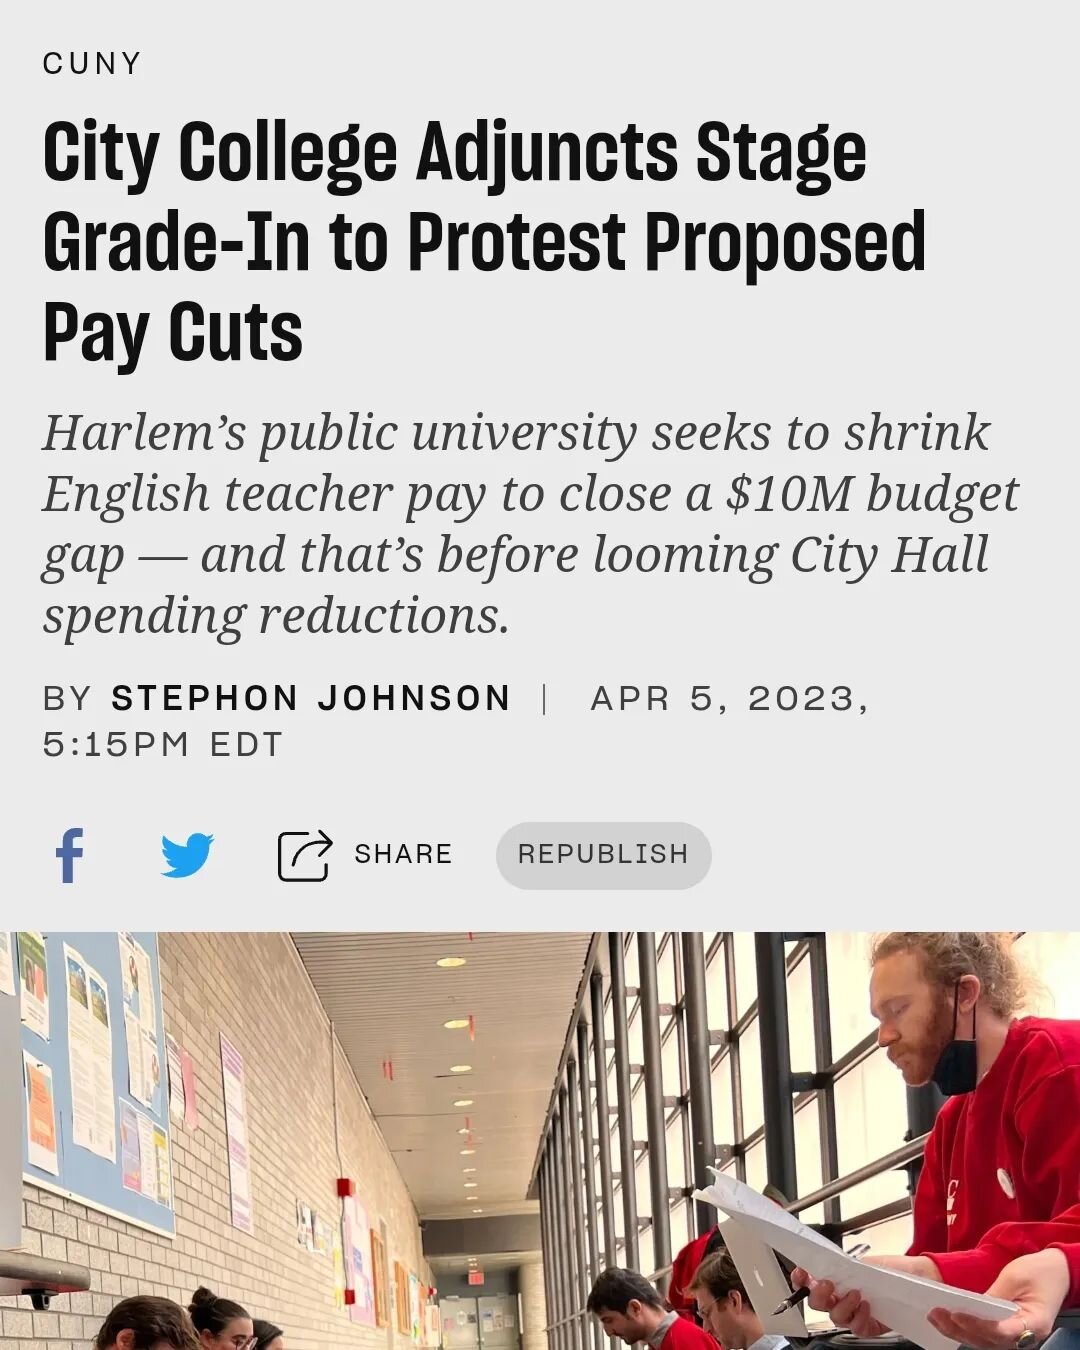 We are beginning to feel the CUNY budget cuts. I'm interviewed in this article about what that means for me and my students. Many parts of CUNY are going to be expected to do more/the same with less.

I feel really lucky to work in such a great depar